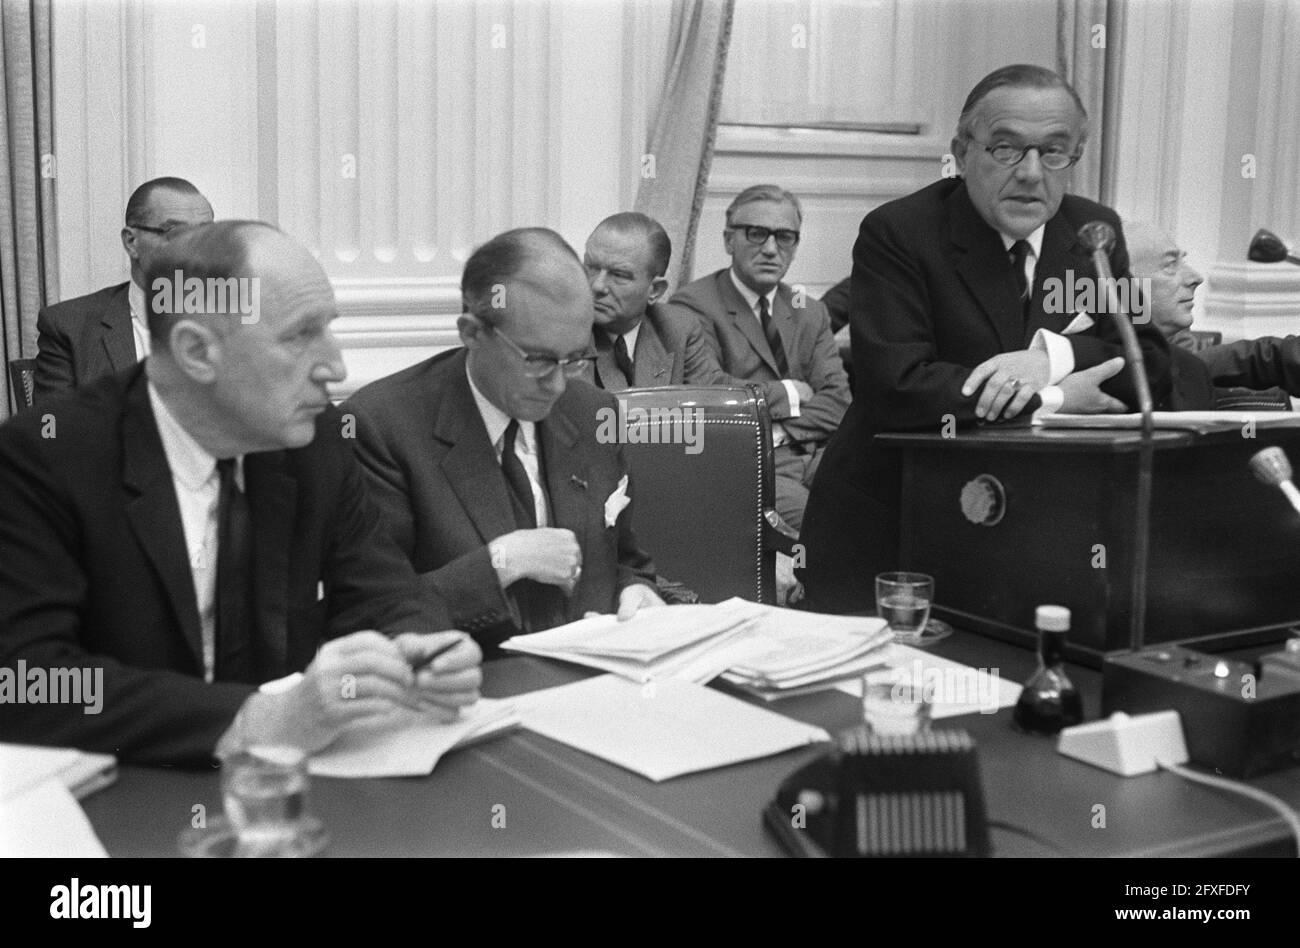 House of Representatives, government answers after the first round of debates of the parties. Prime Minister De Jong (right) answers, left Minister Luns and Minister Witteveen, October 16, 1969, Debates, The Netherlands, 20th century press agency photo, news to remember, documentary, historic photography 1945-1990, visual stories, human history of the Twentieth Century, capturing moments in time Stock Photo